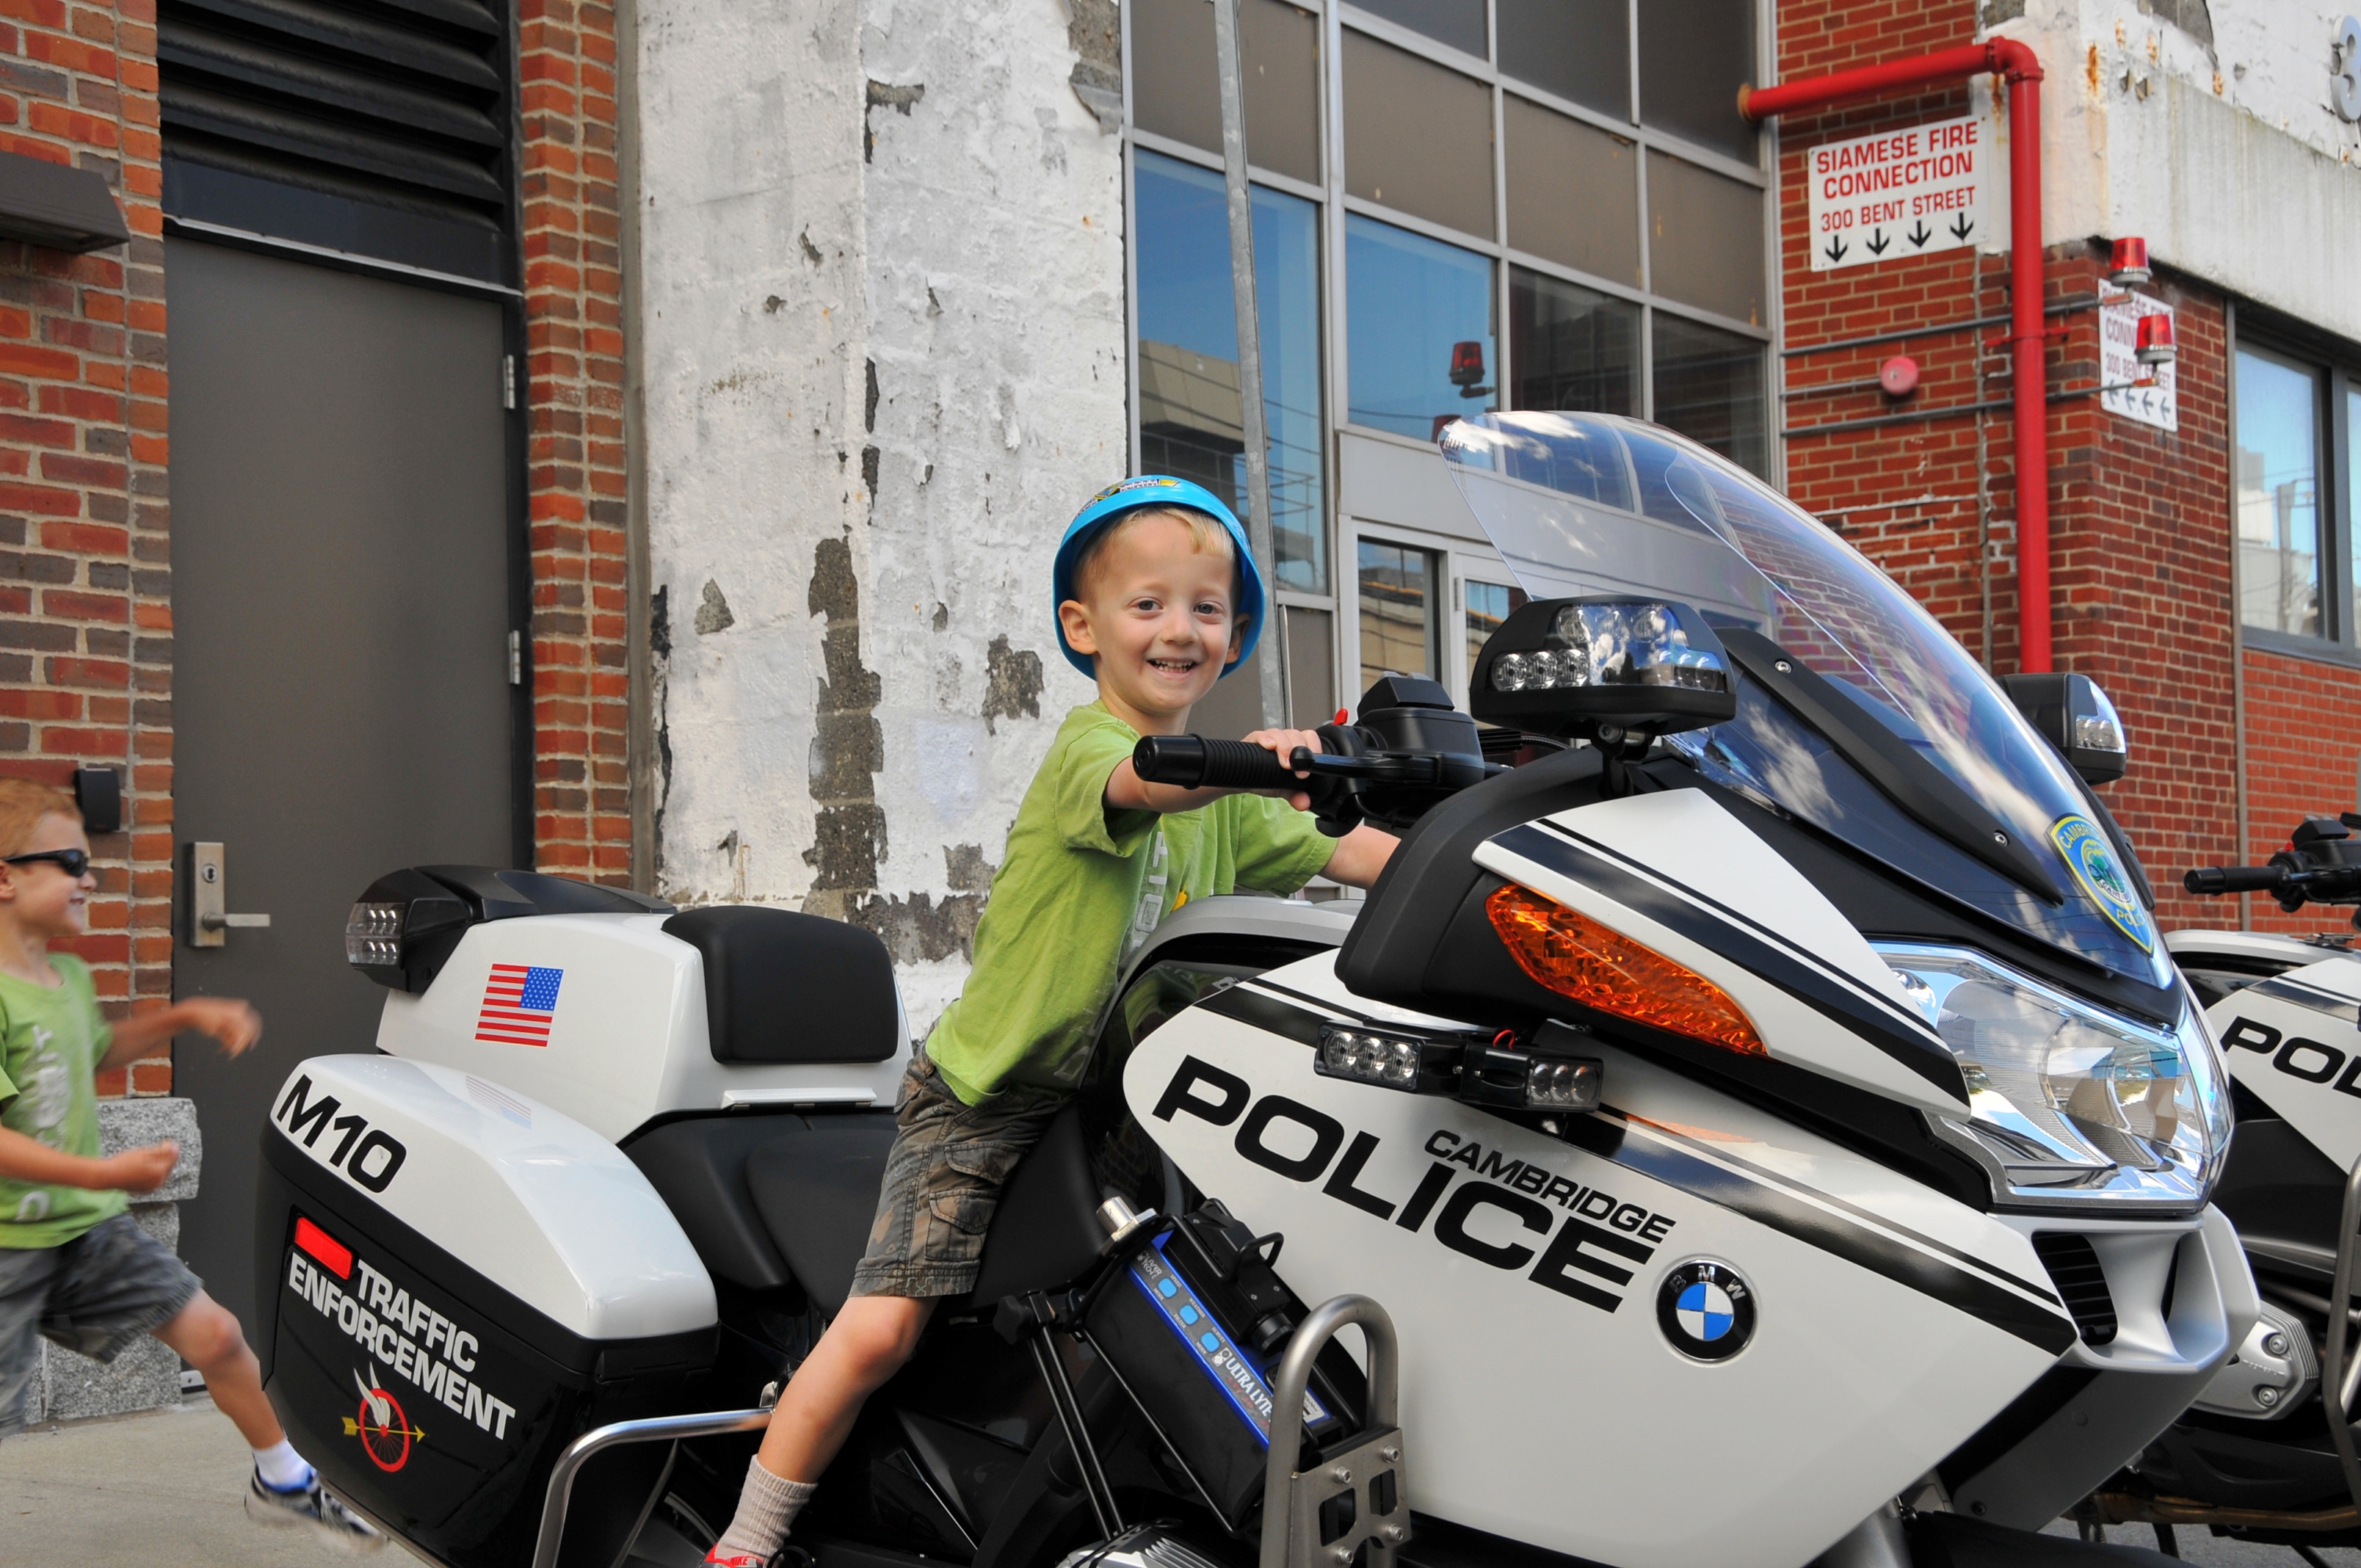 Child on Police Motorcycle